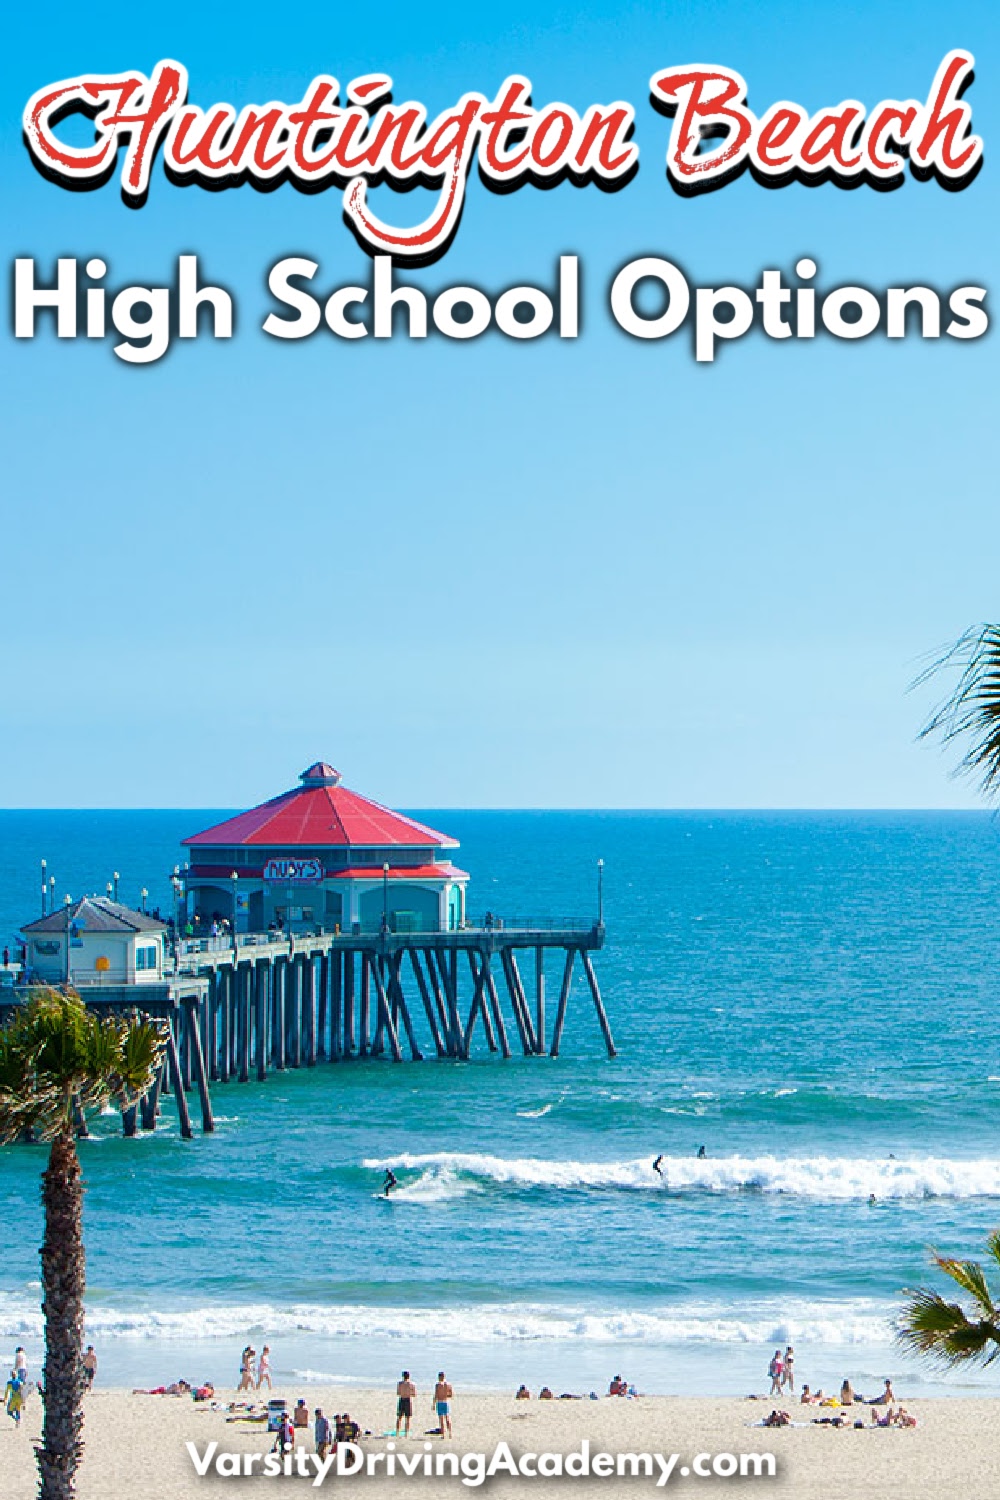 Where you live in Huntington Beach will determine which Huntington Beach high school options are available to you and your family.